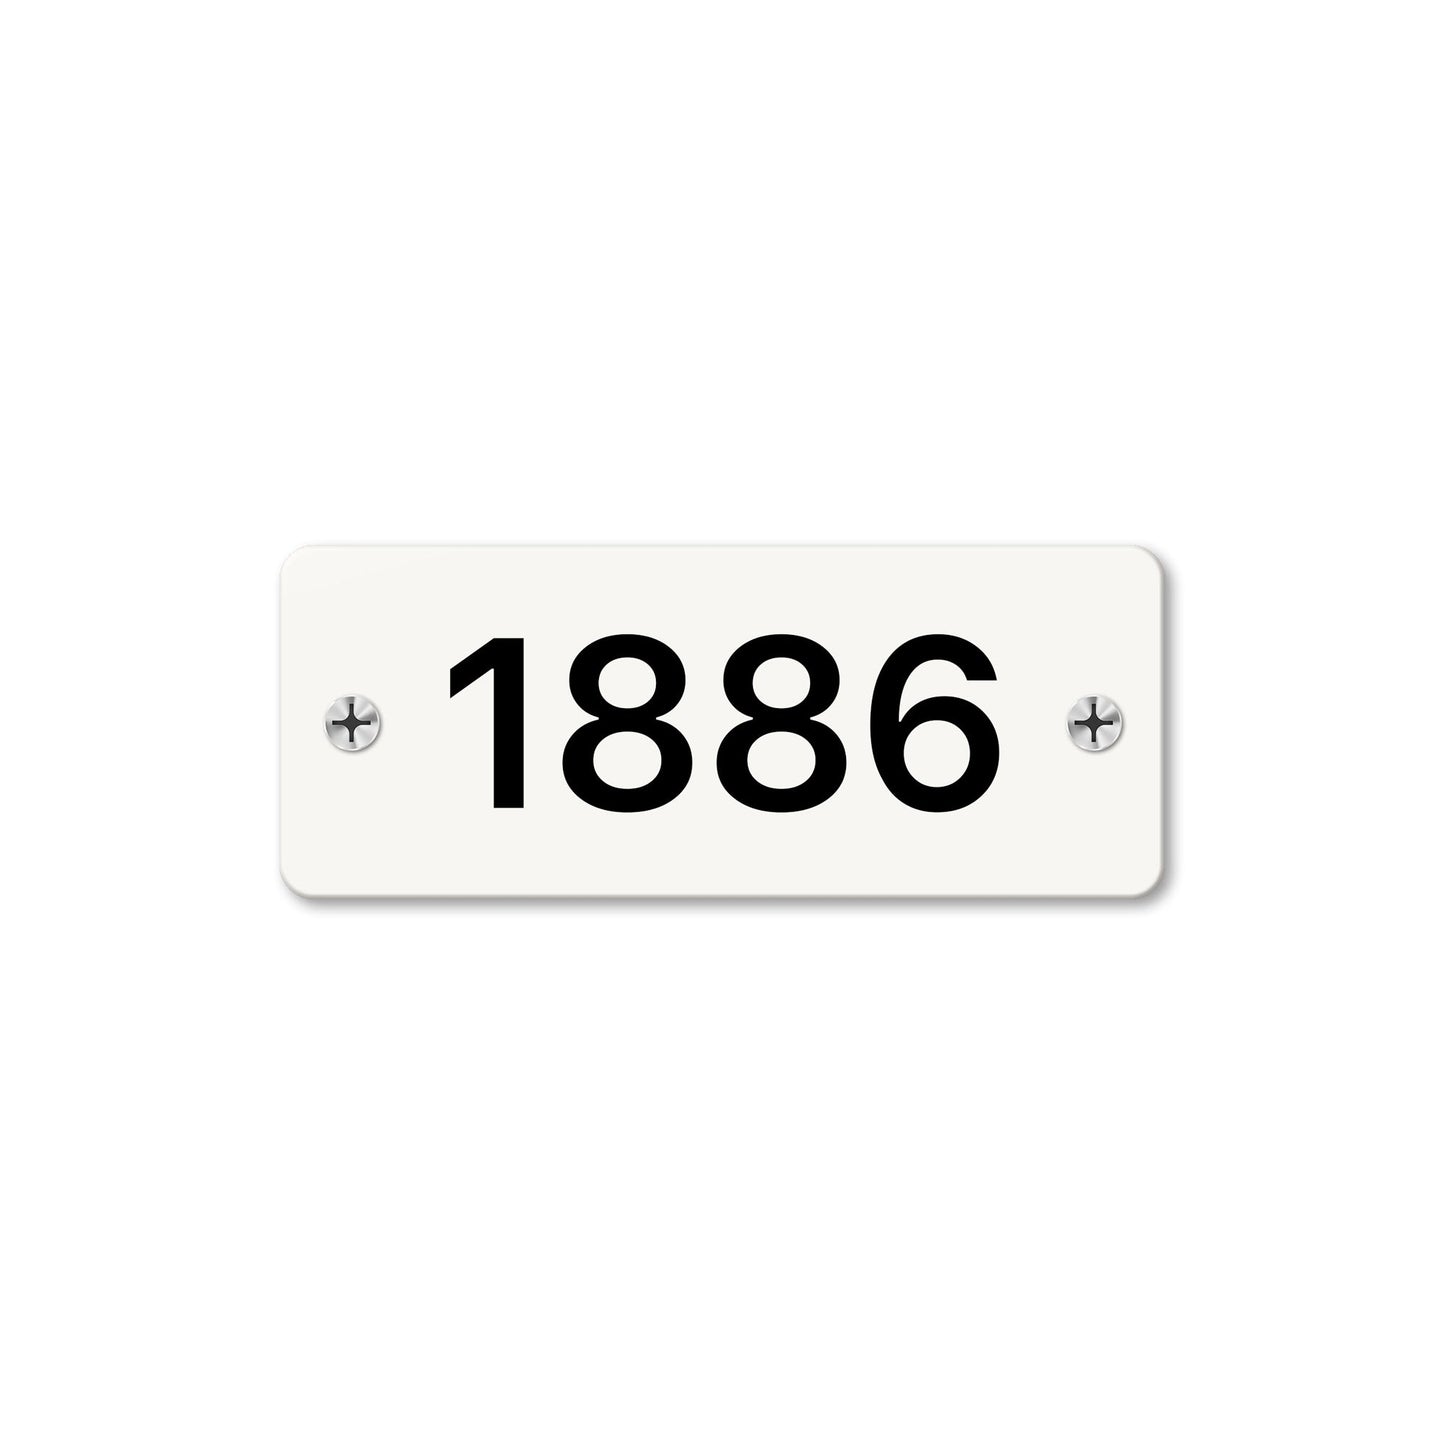 Numeral 1886